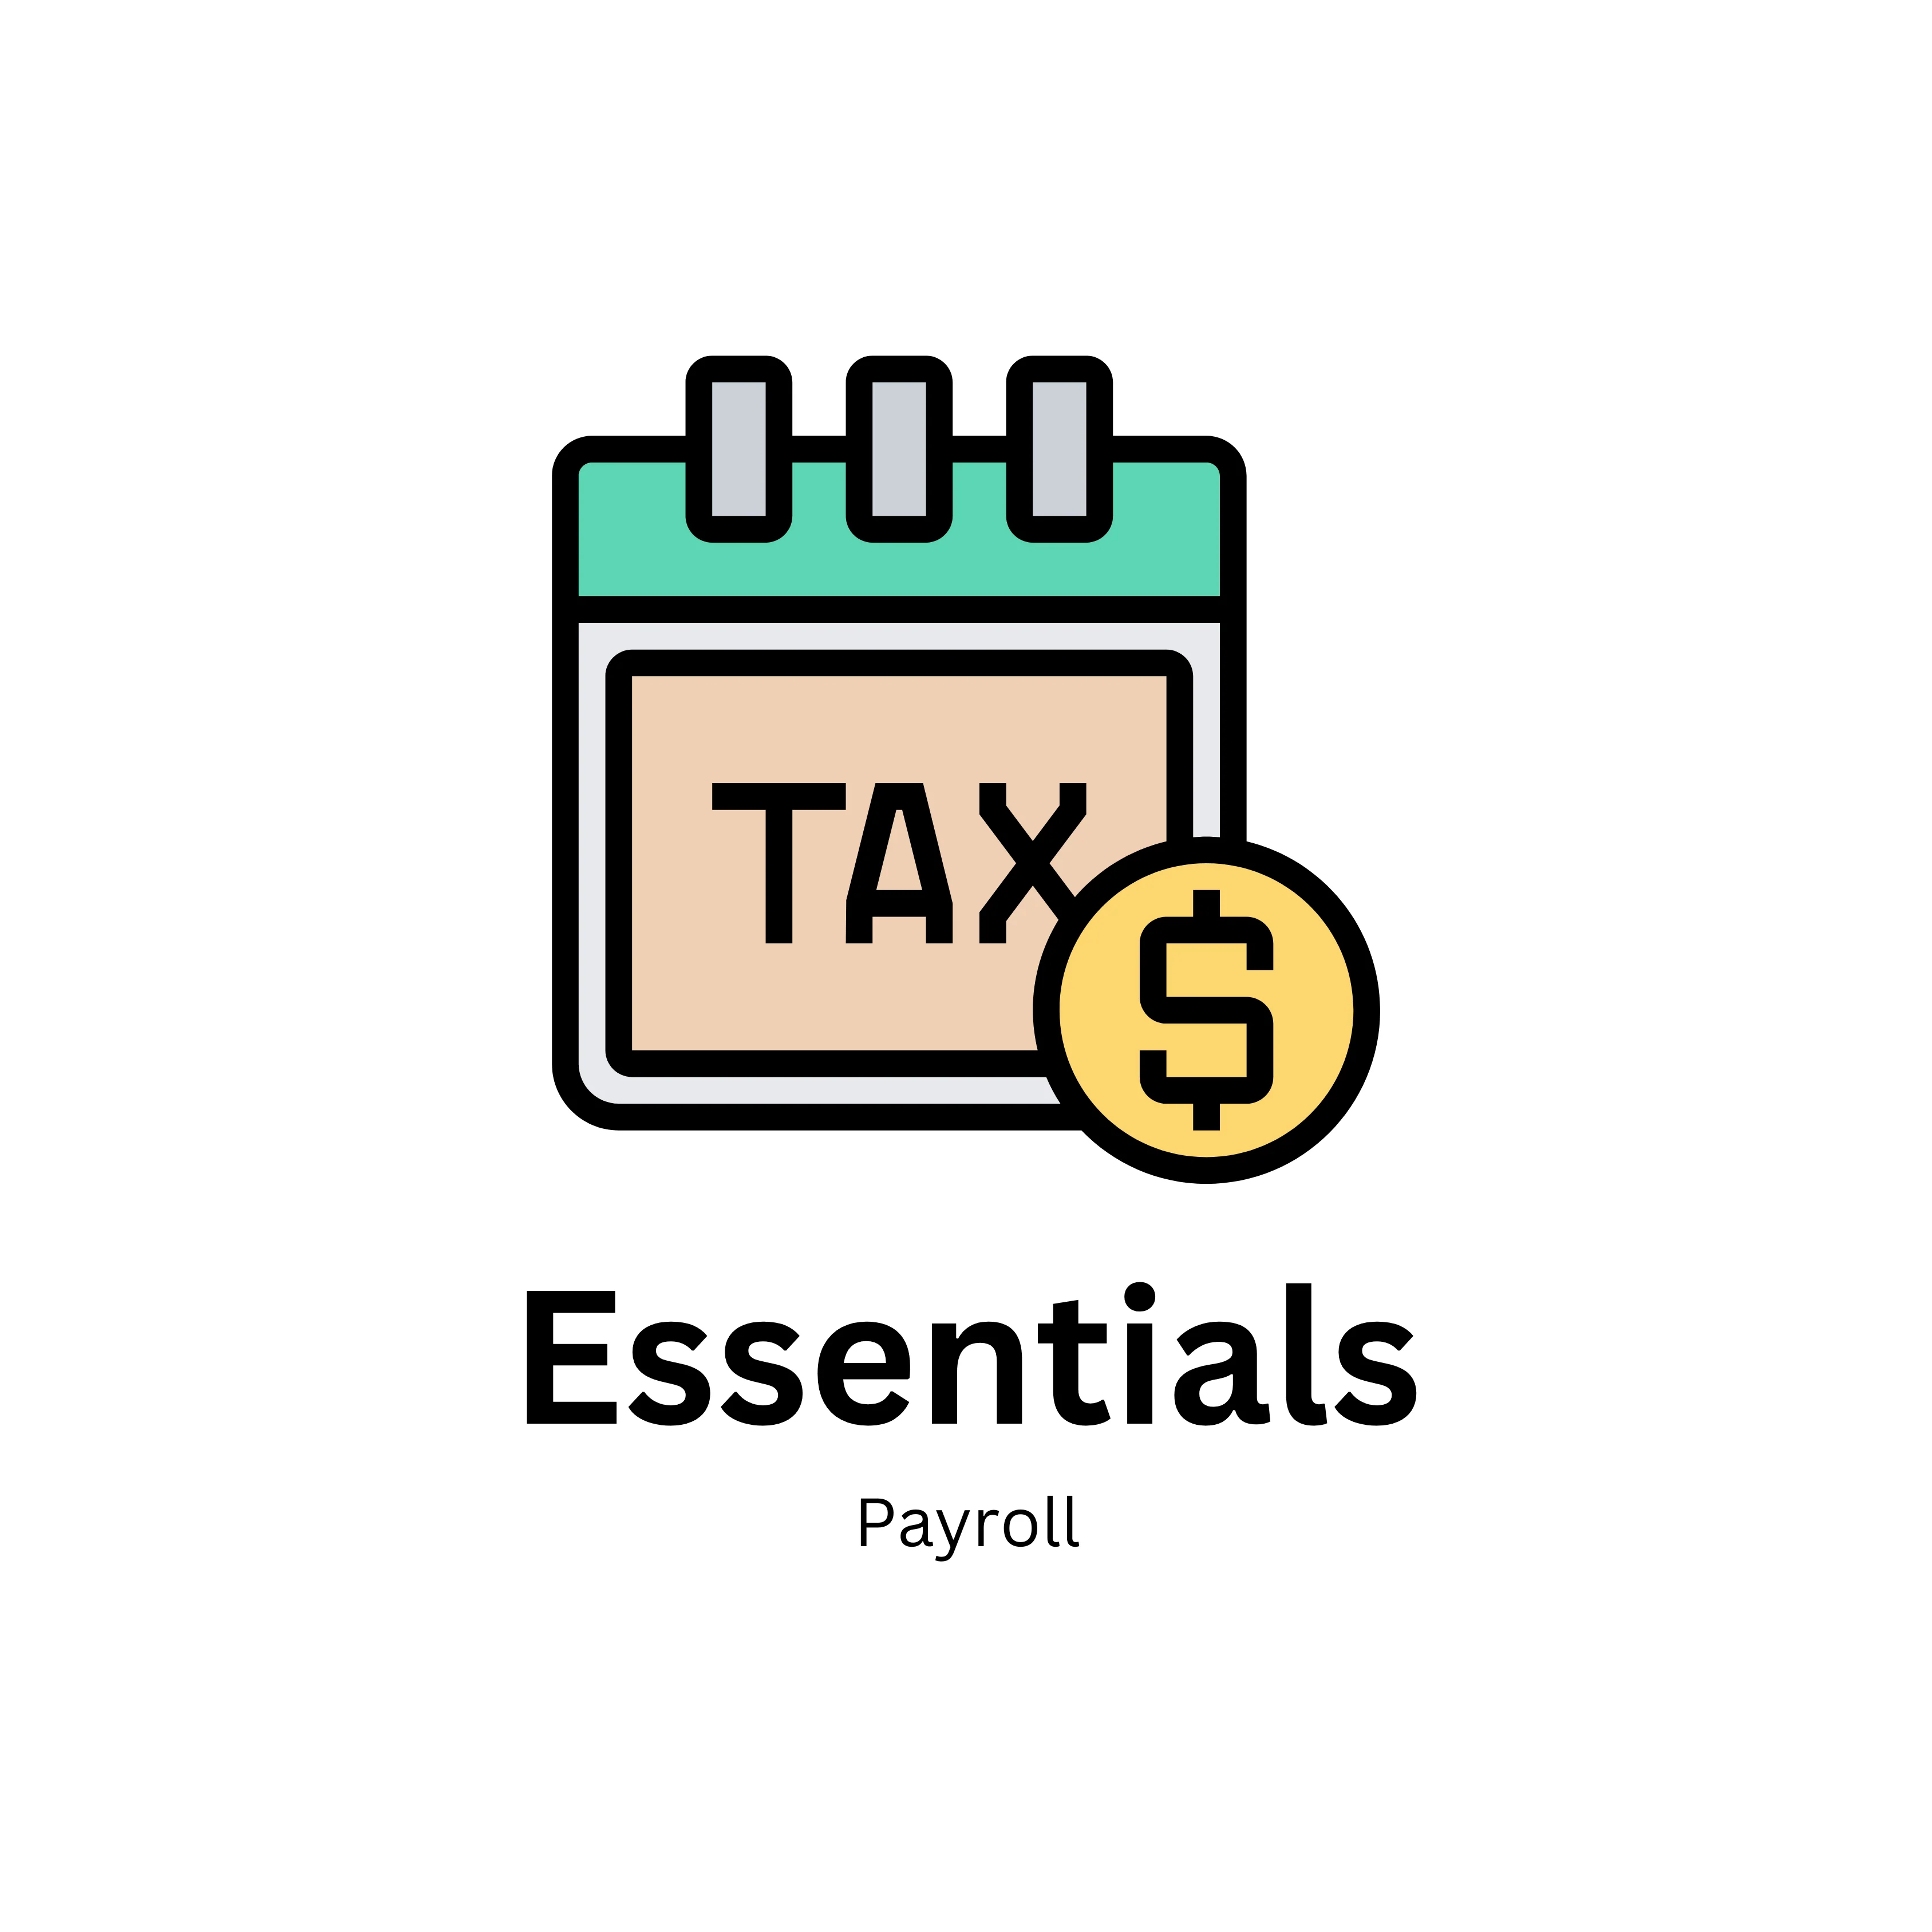 Basic+salary+calculation+and+tax+payment+services